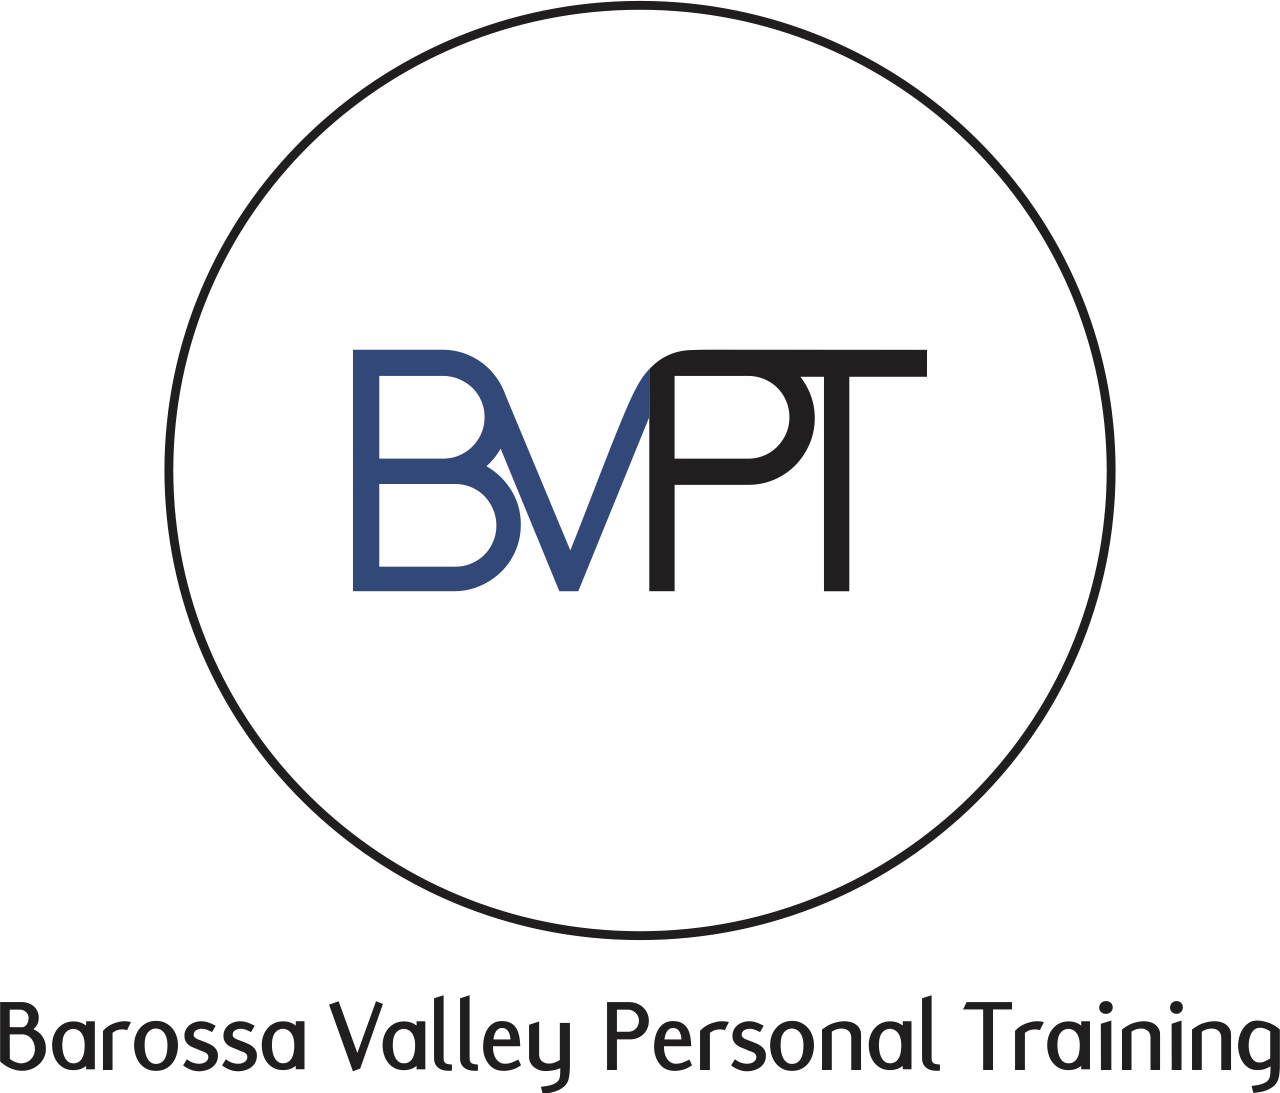 BVPT